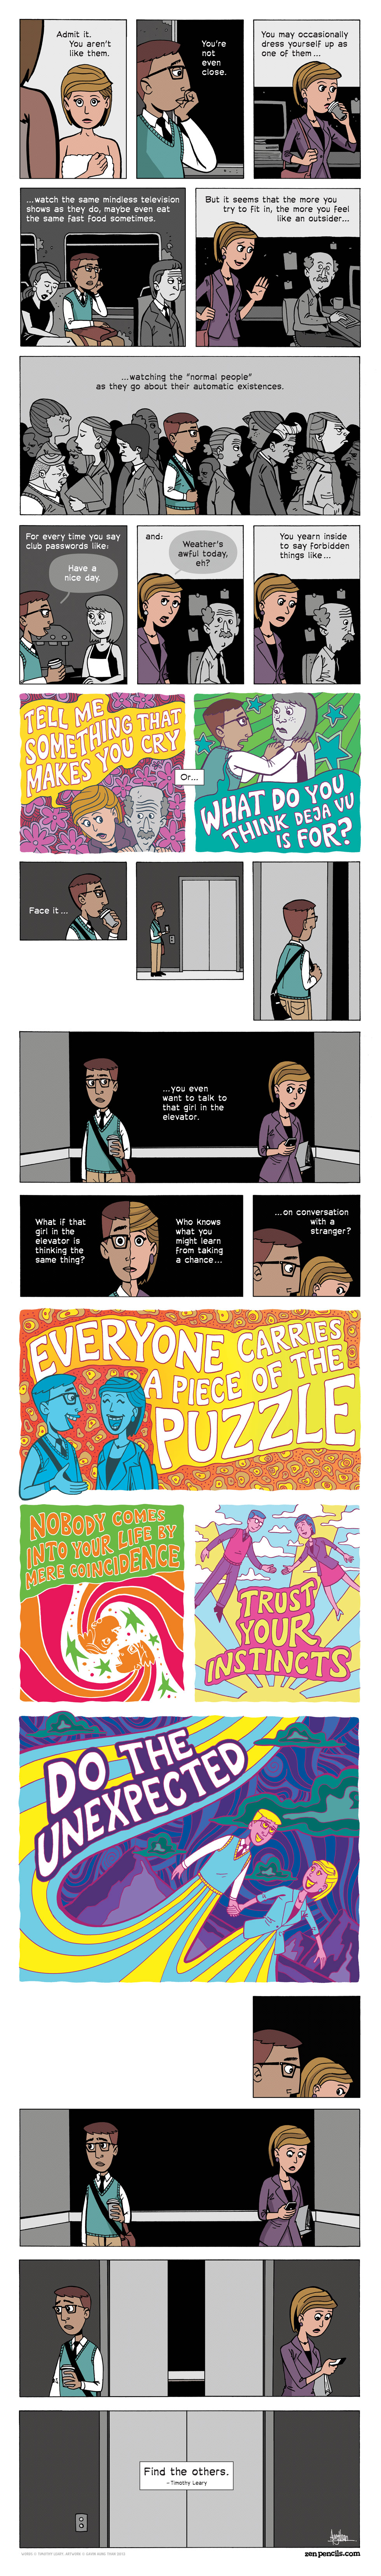 ZEN PENCILS - 102. TIMOTHY LEARY: You aren’t like them